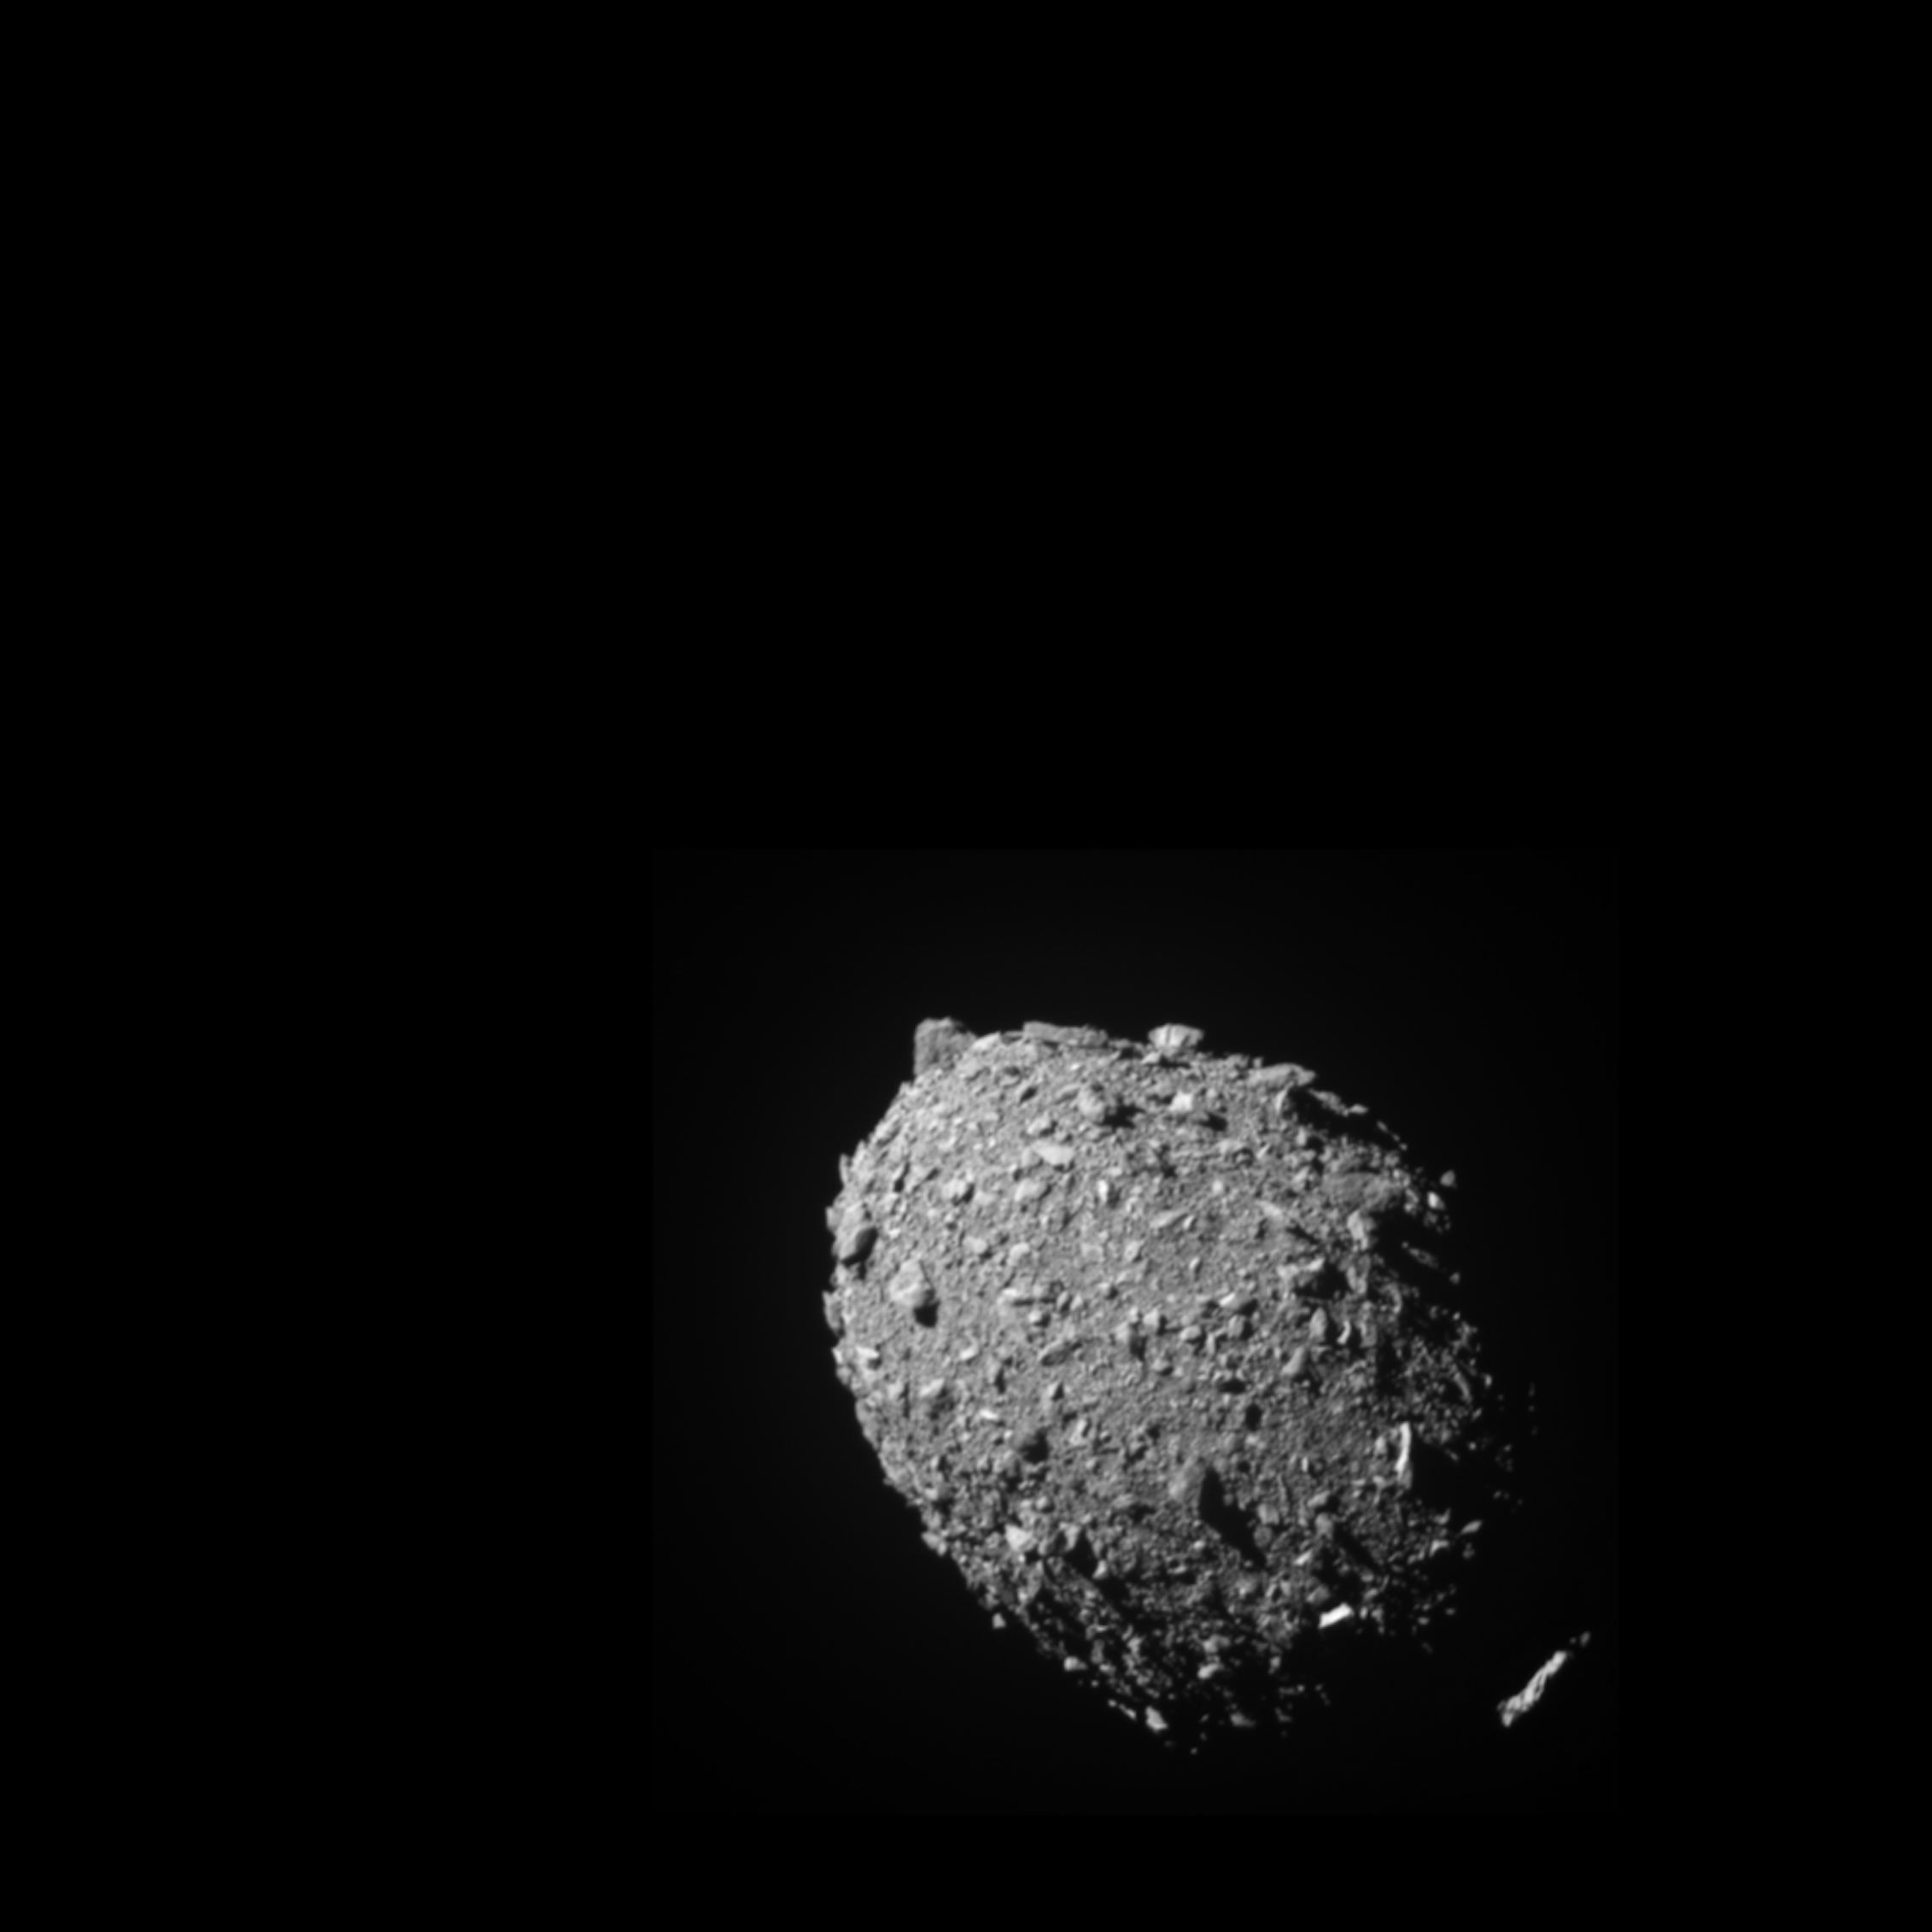 NASA successfully shifted an asteroid’s orbit – DART spacecraft crashed into and moved Dimorphos